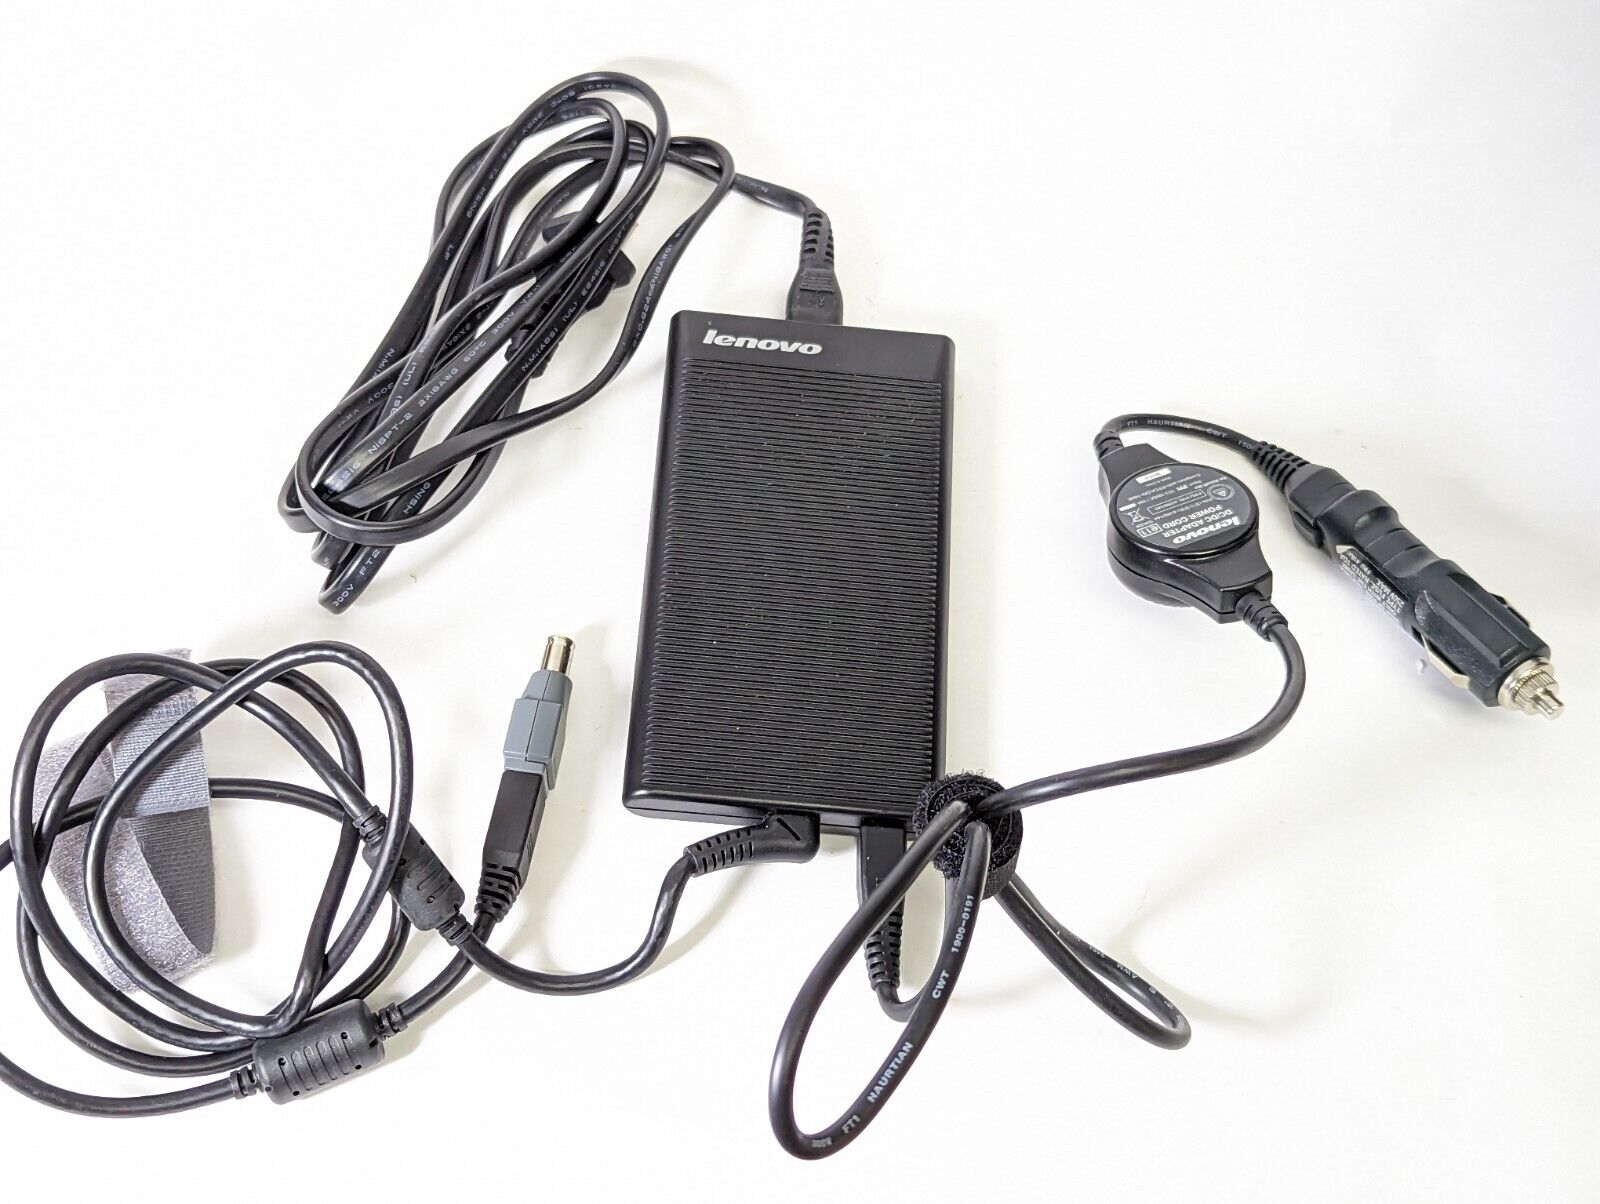 Lenovo 90W Ultra Slim AC/DC Combo Adapter w/ Power Cable 41R0140